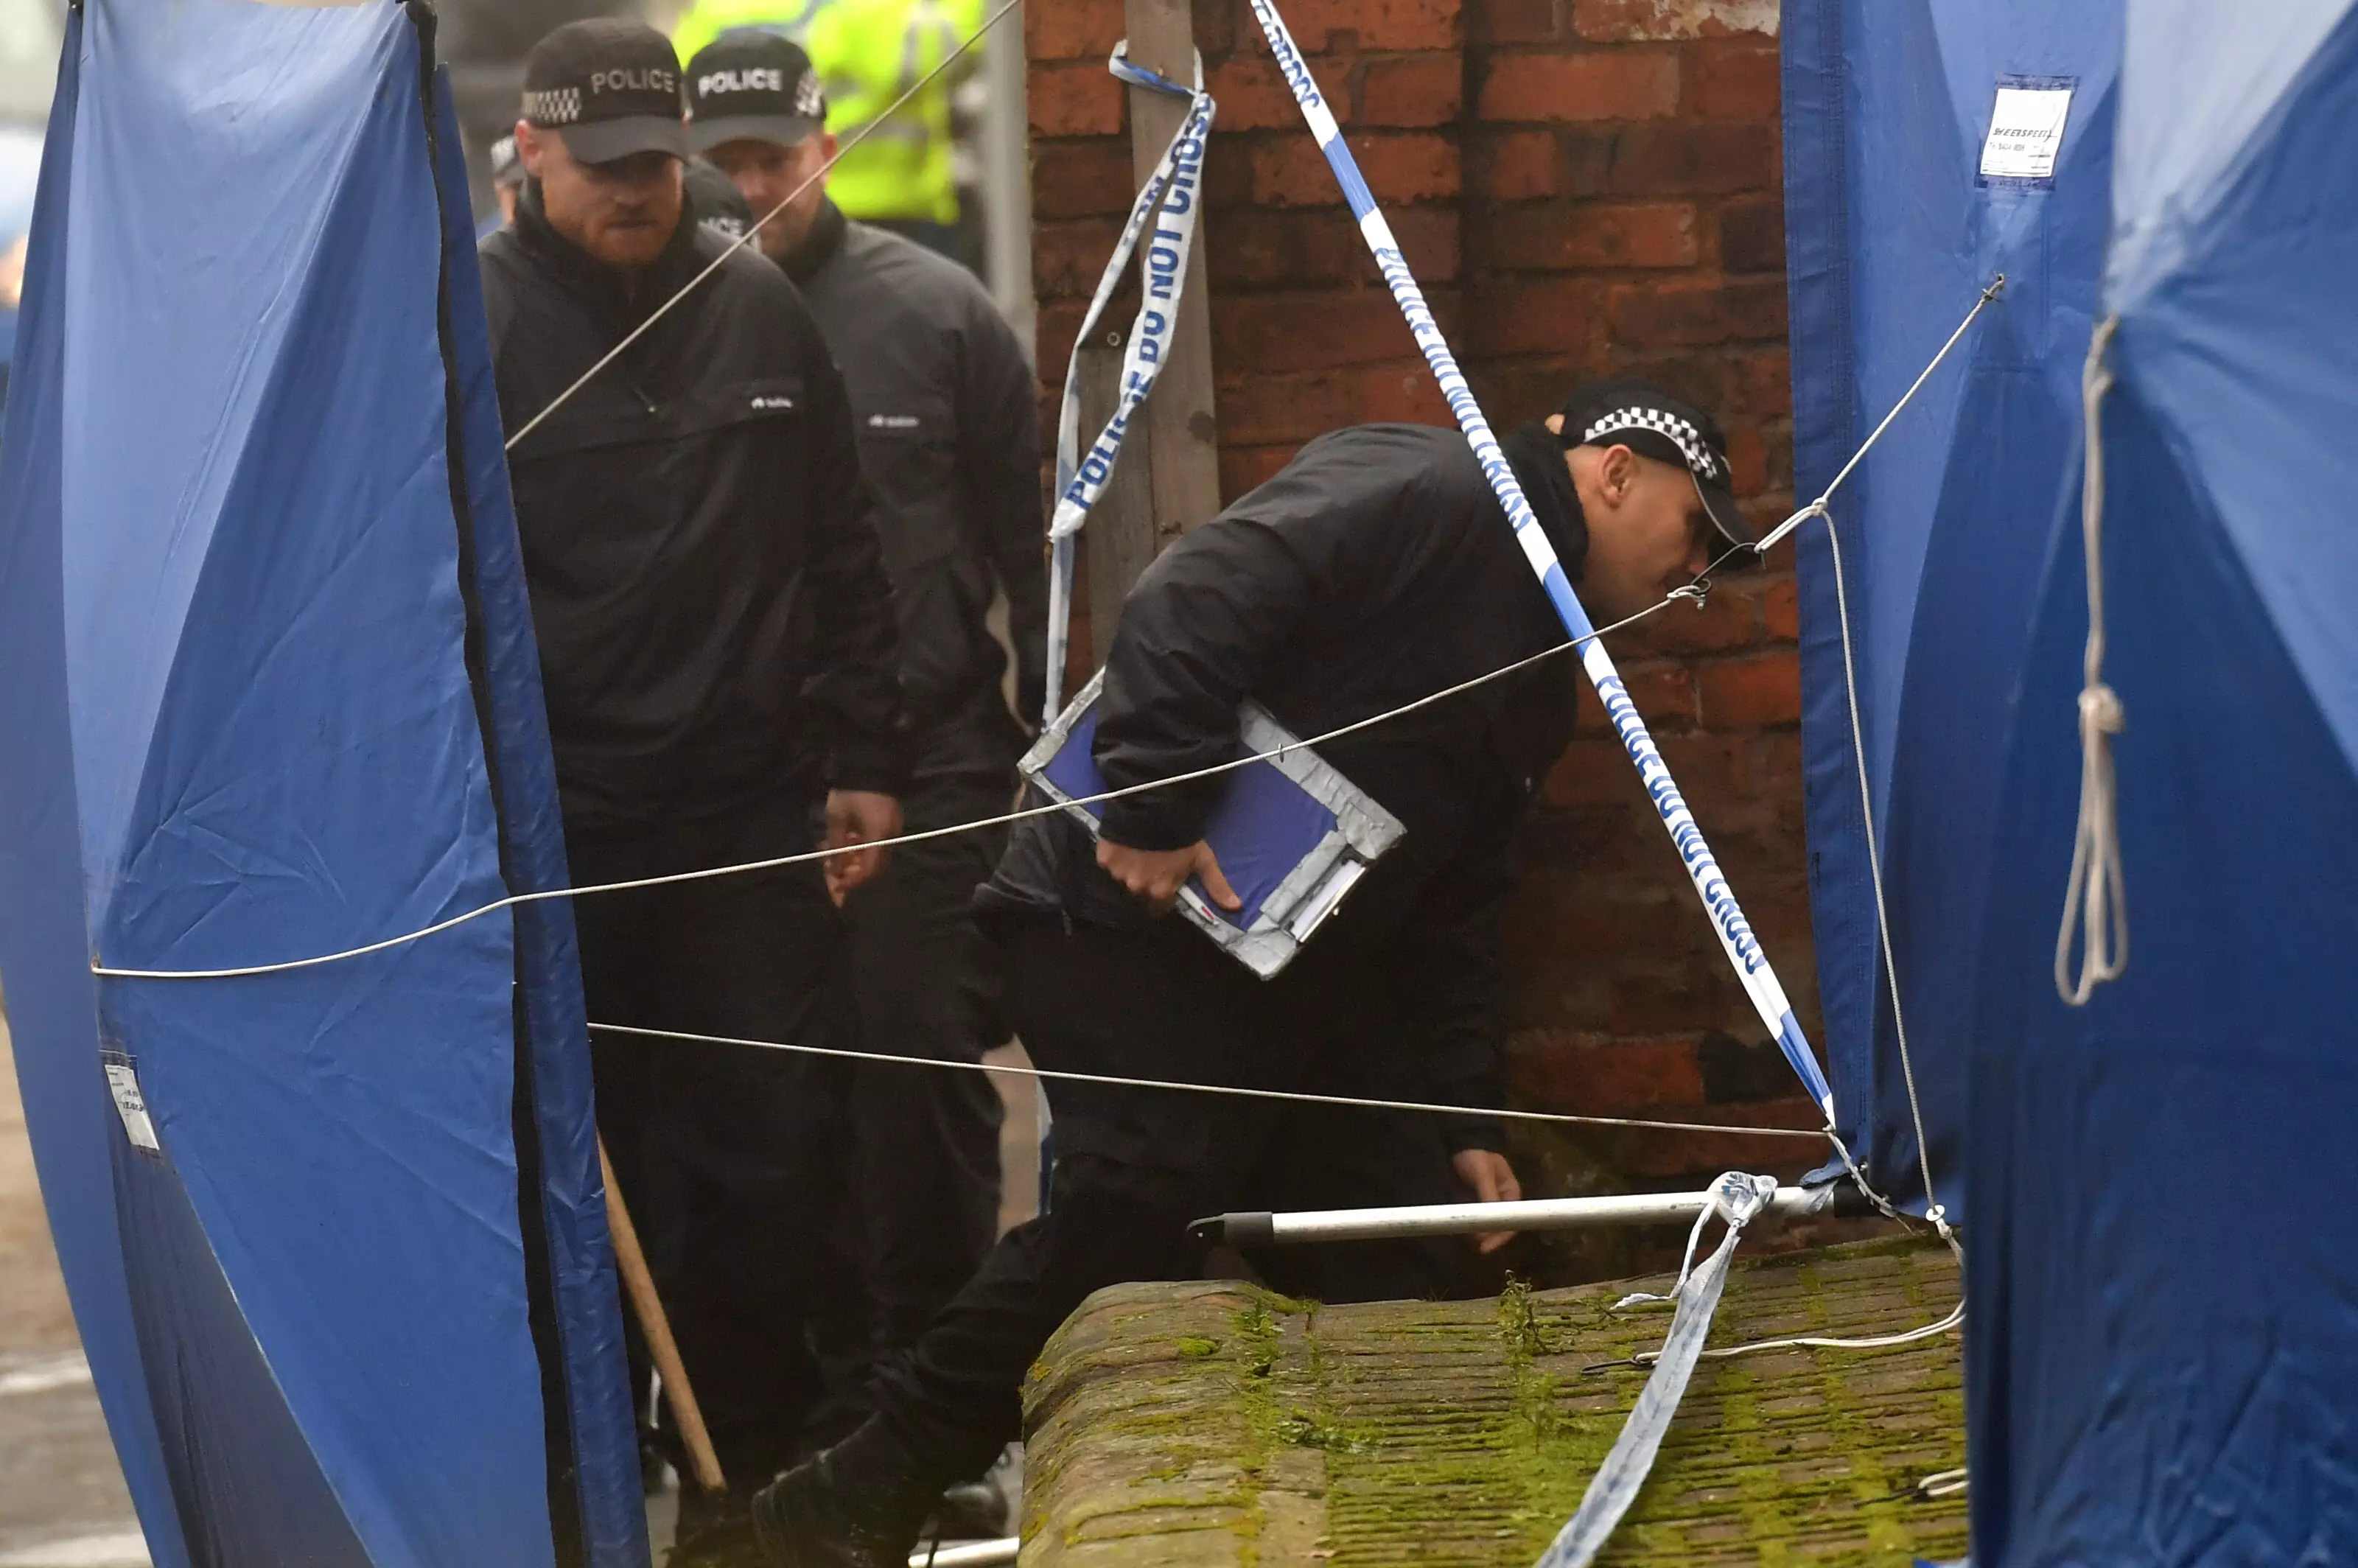 Police are searching a Staffordshire address that is said to be linked to yesterday's attack.